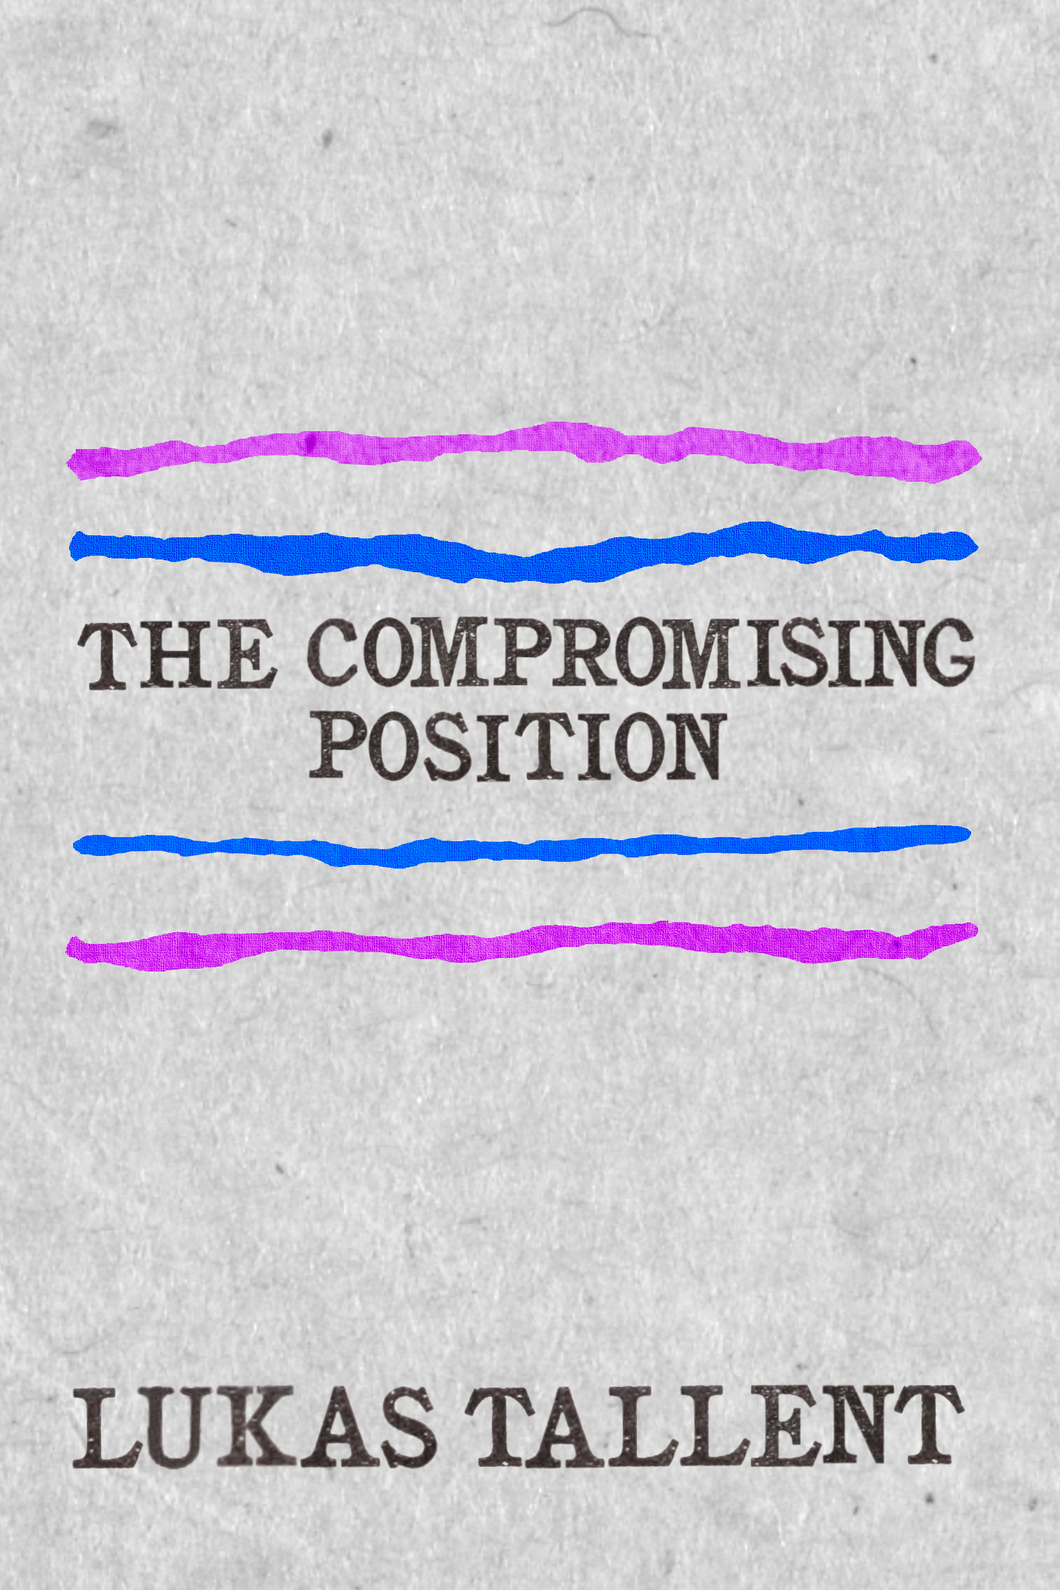 The Compromising Position, by Lukas Tallent-Print Books-Bottlecap Press